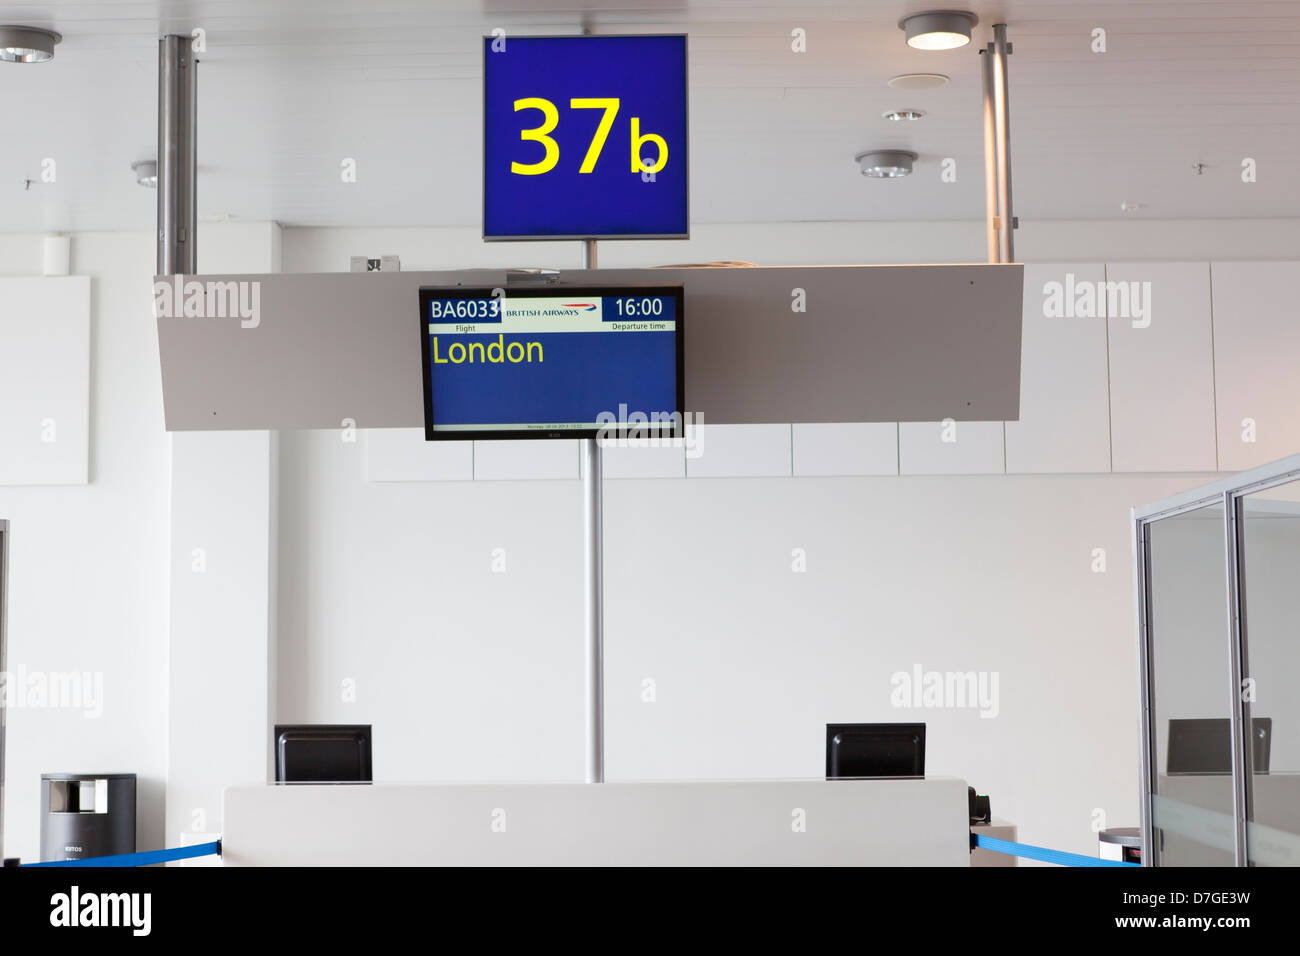 Airport boarding terminal gate № 37b to the London ready for a passengers. Nobody, Vantaa airport, Helsinki, Finland Stock Photo